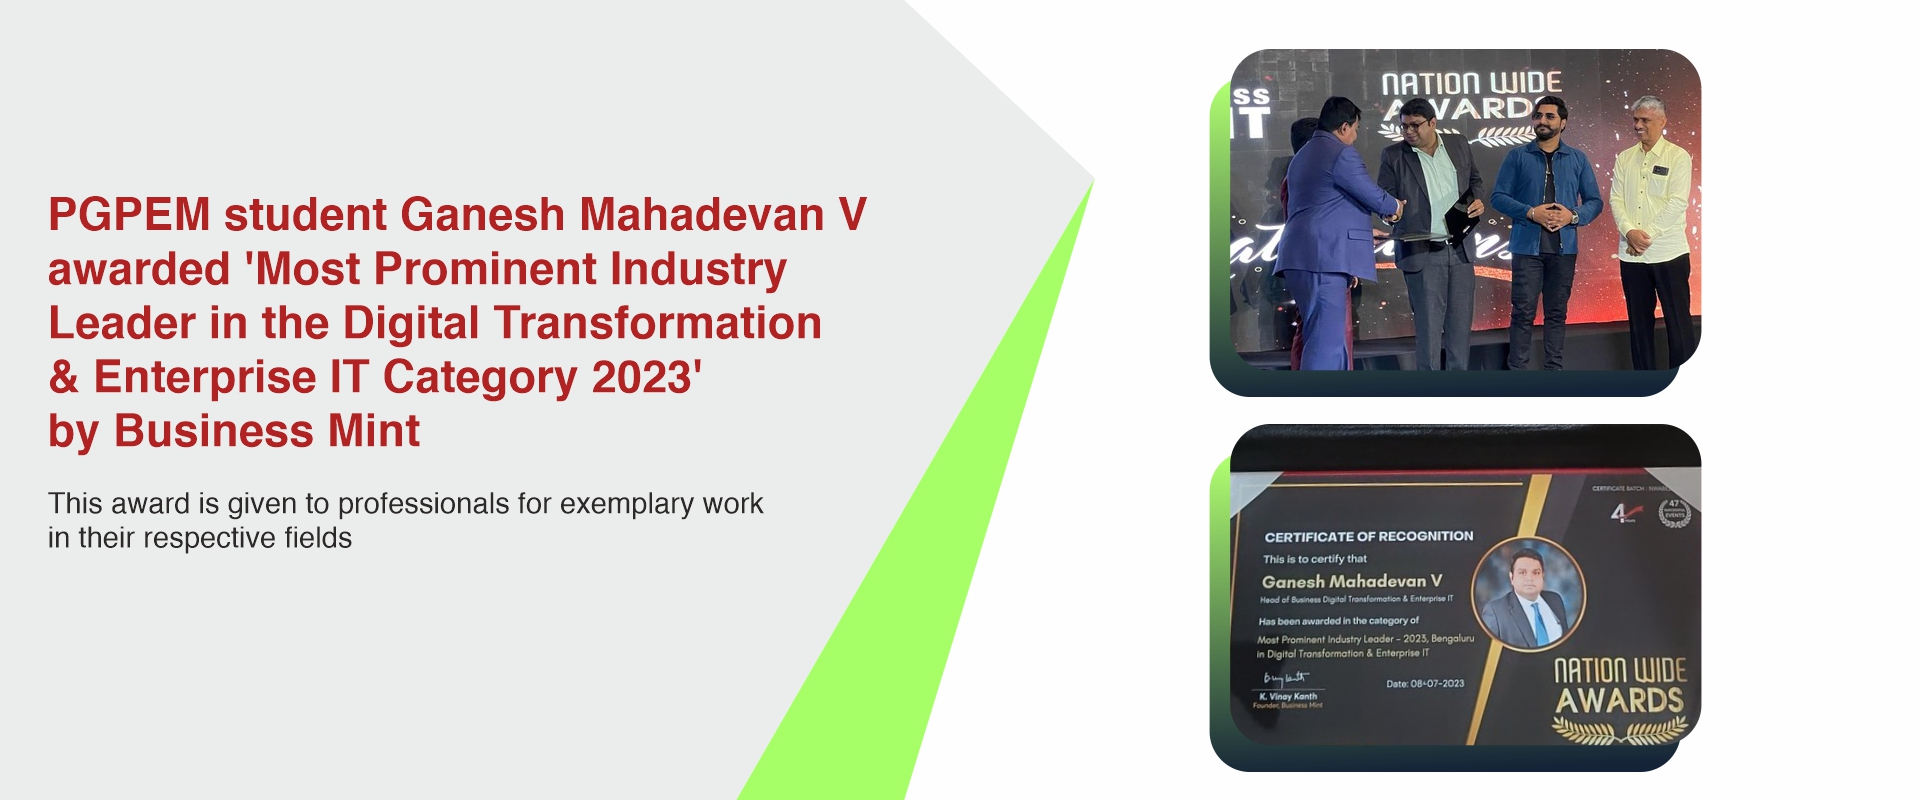 PGPEM student Ganesh Mahadevan V awarded ‘Most Prominent Industry Leader in the Digital Transformation & Enterprise IT Category 2023’ by Business Mint